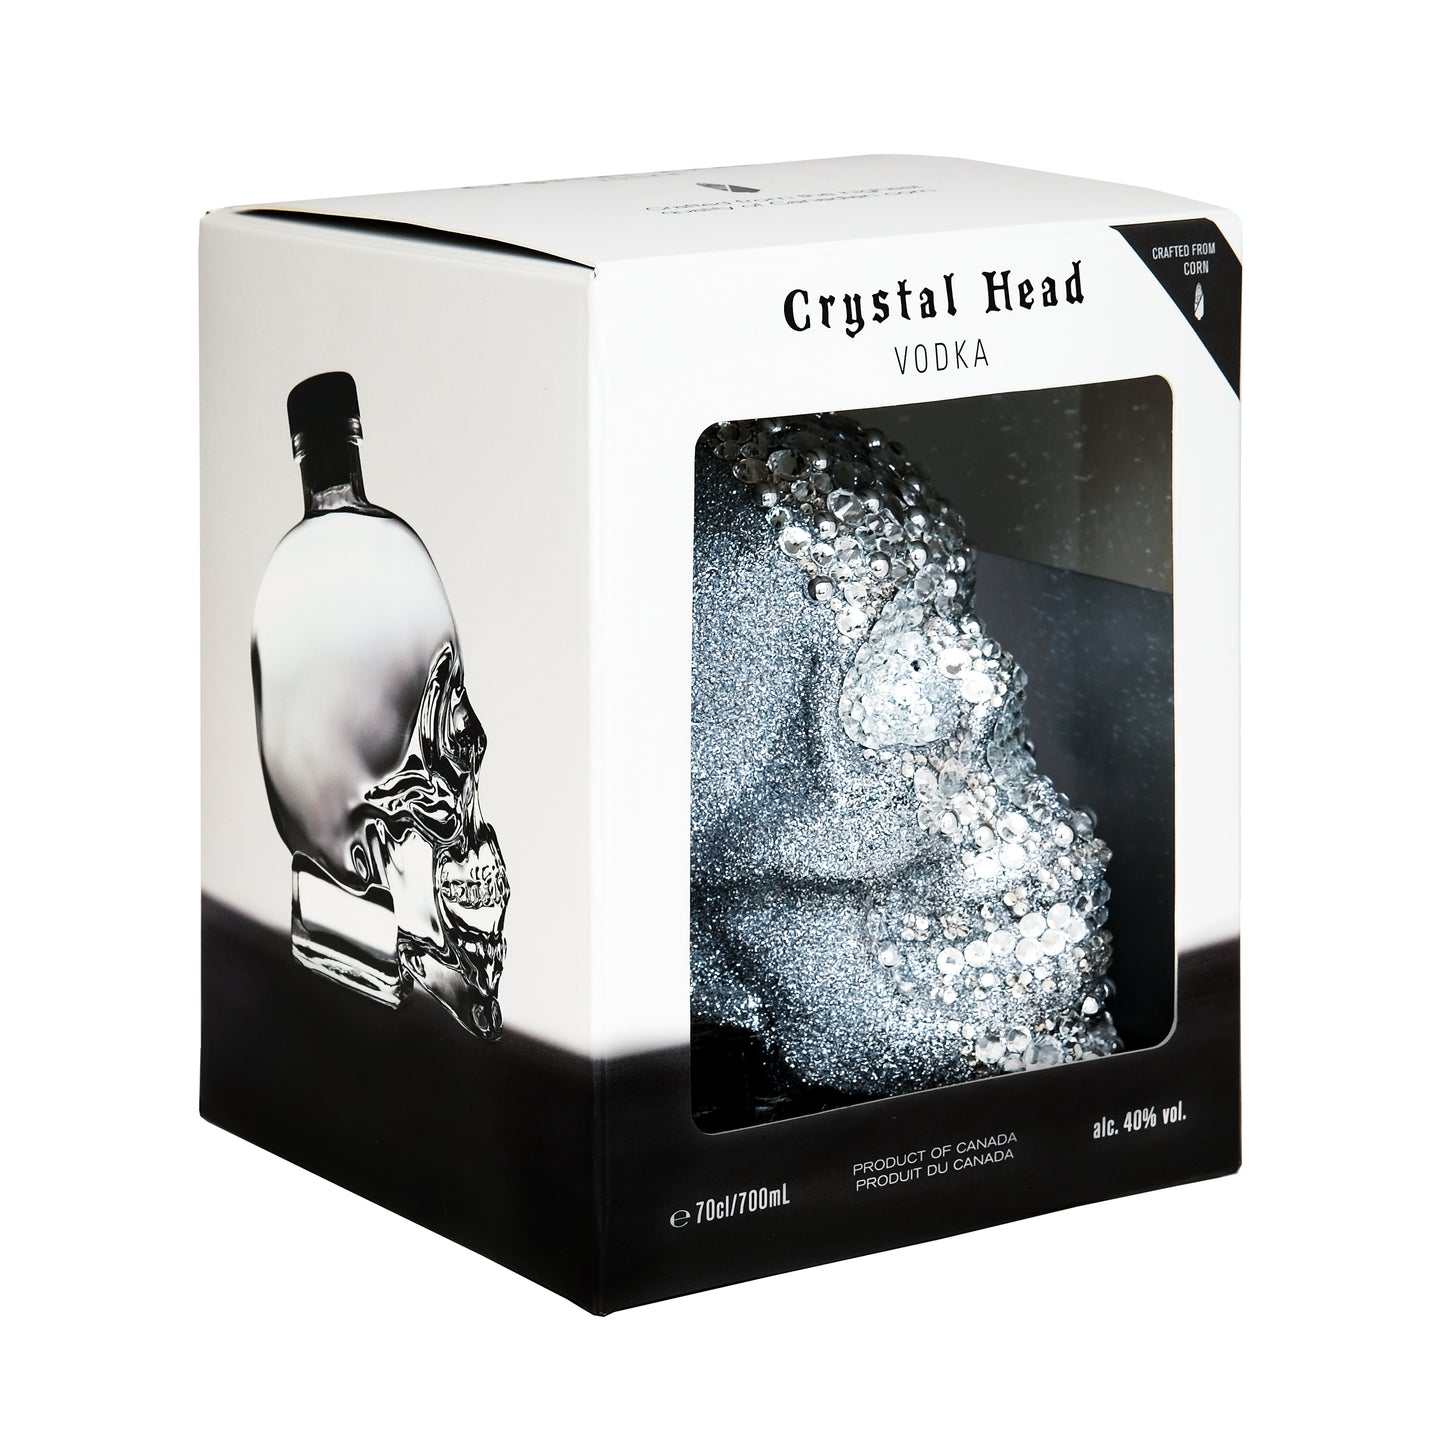 Crystal Head vodka decorated with cut glass stones